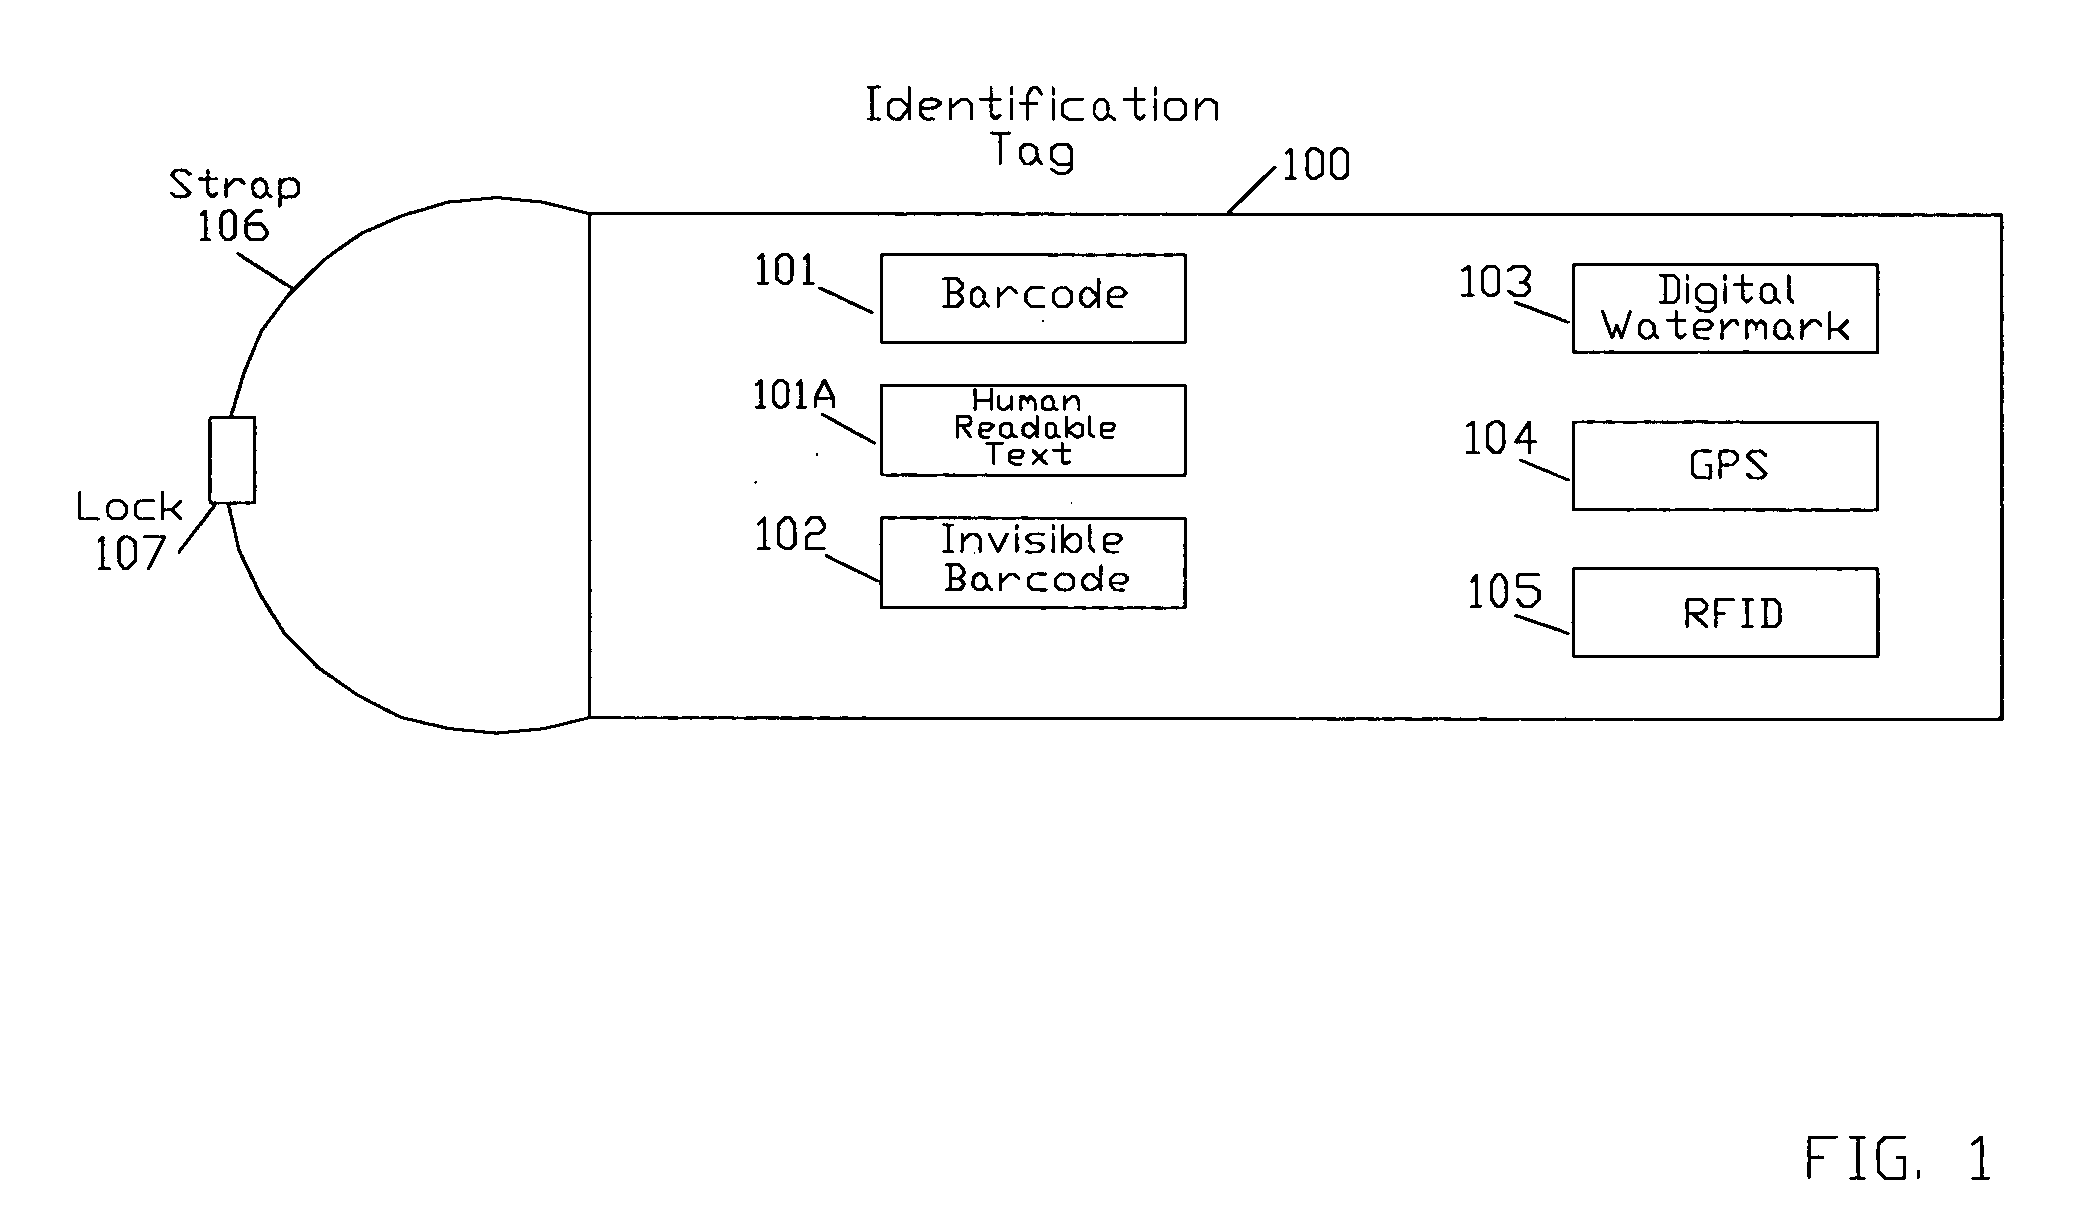 System, method, and apparatus for identifying and authenticating the presence of high value assets at remote locations